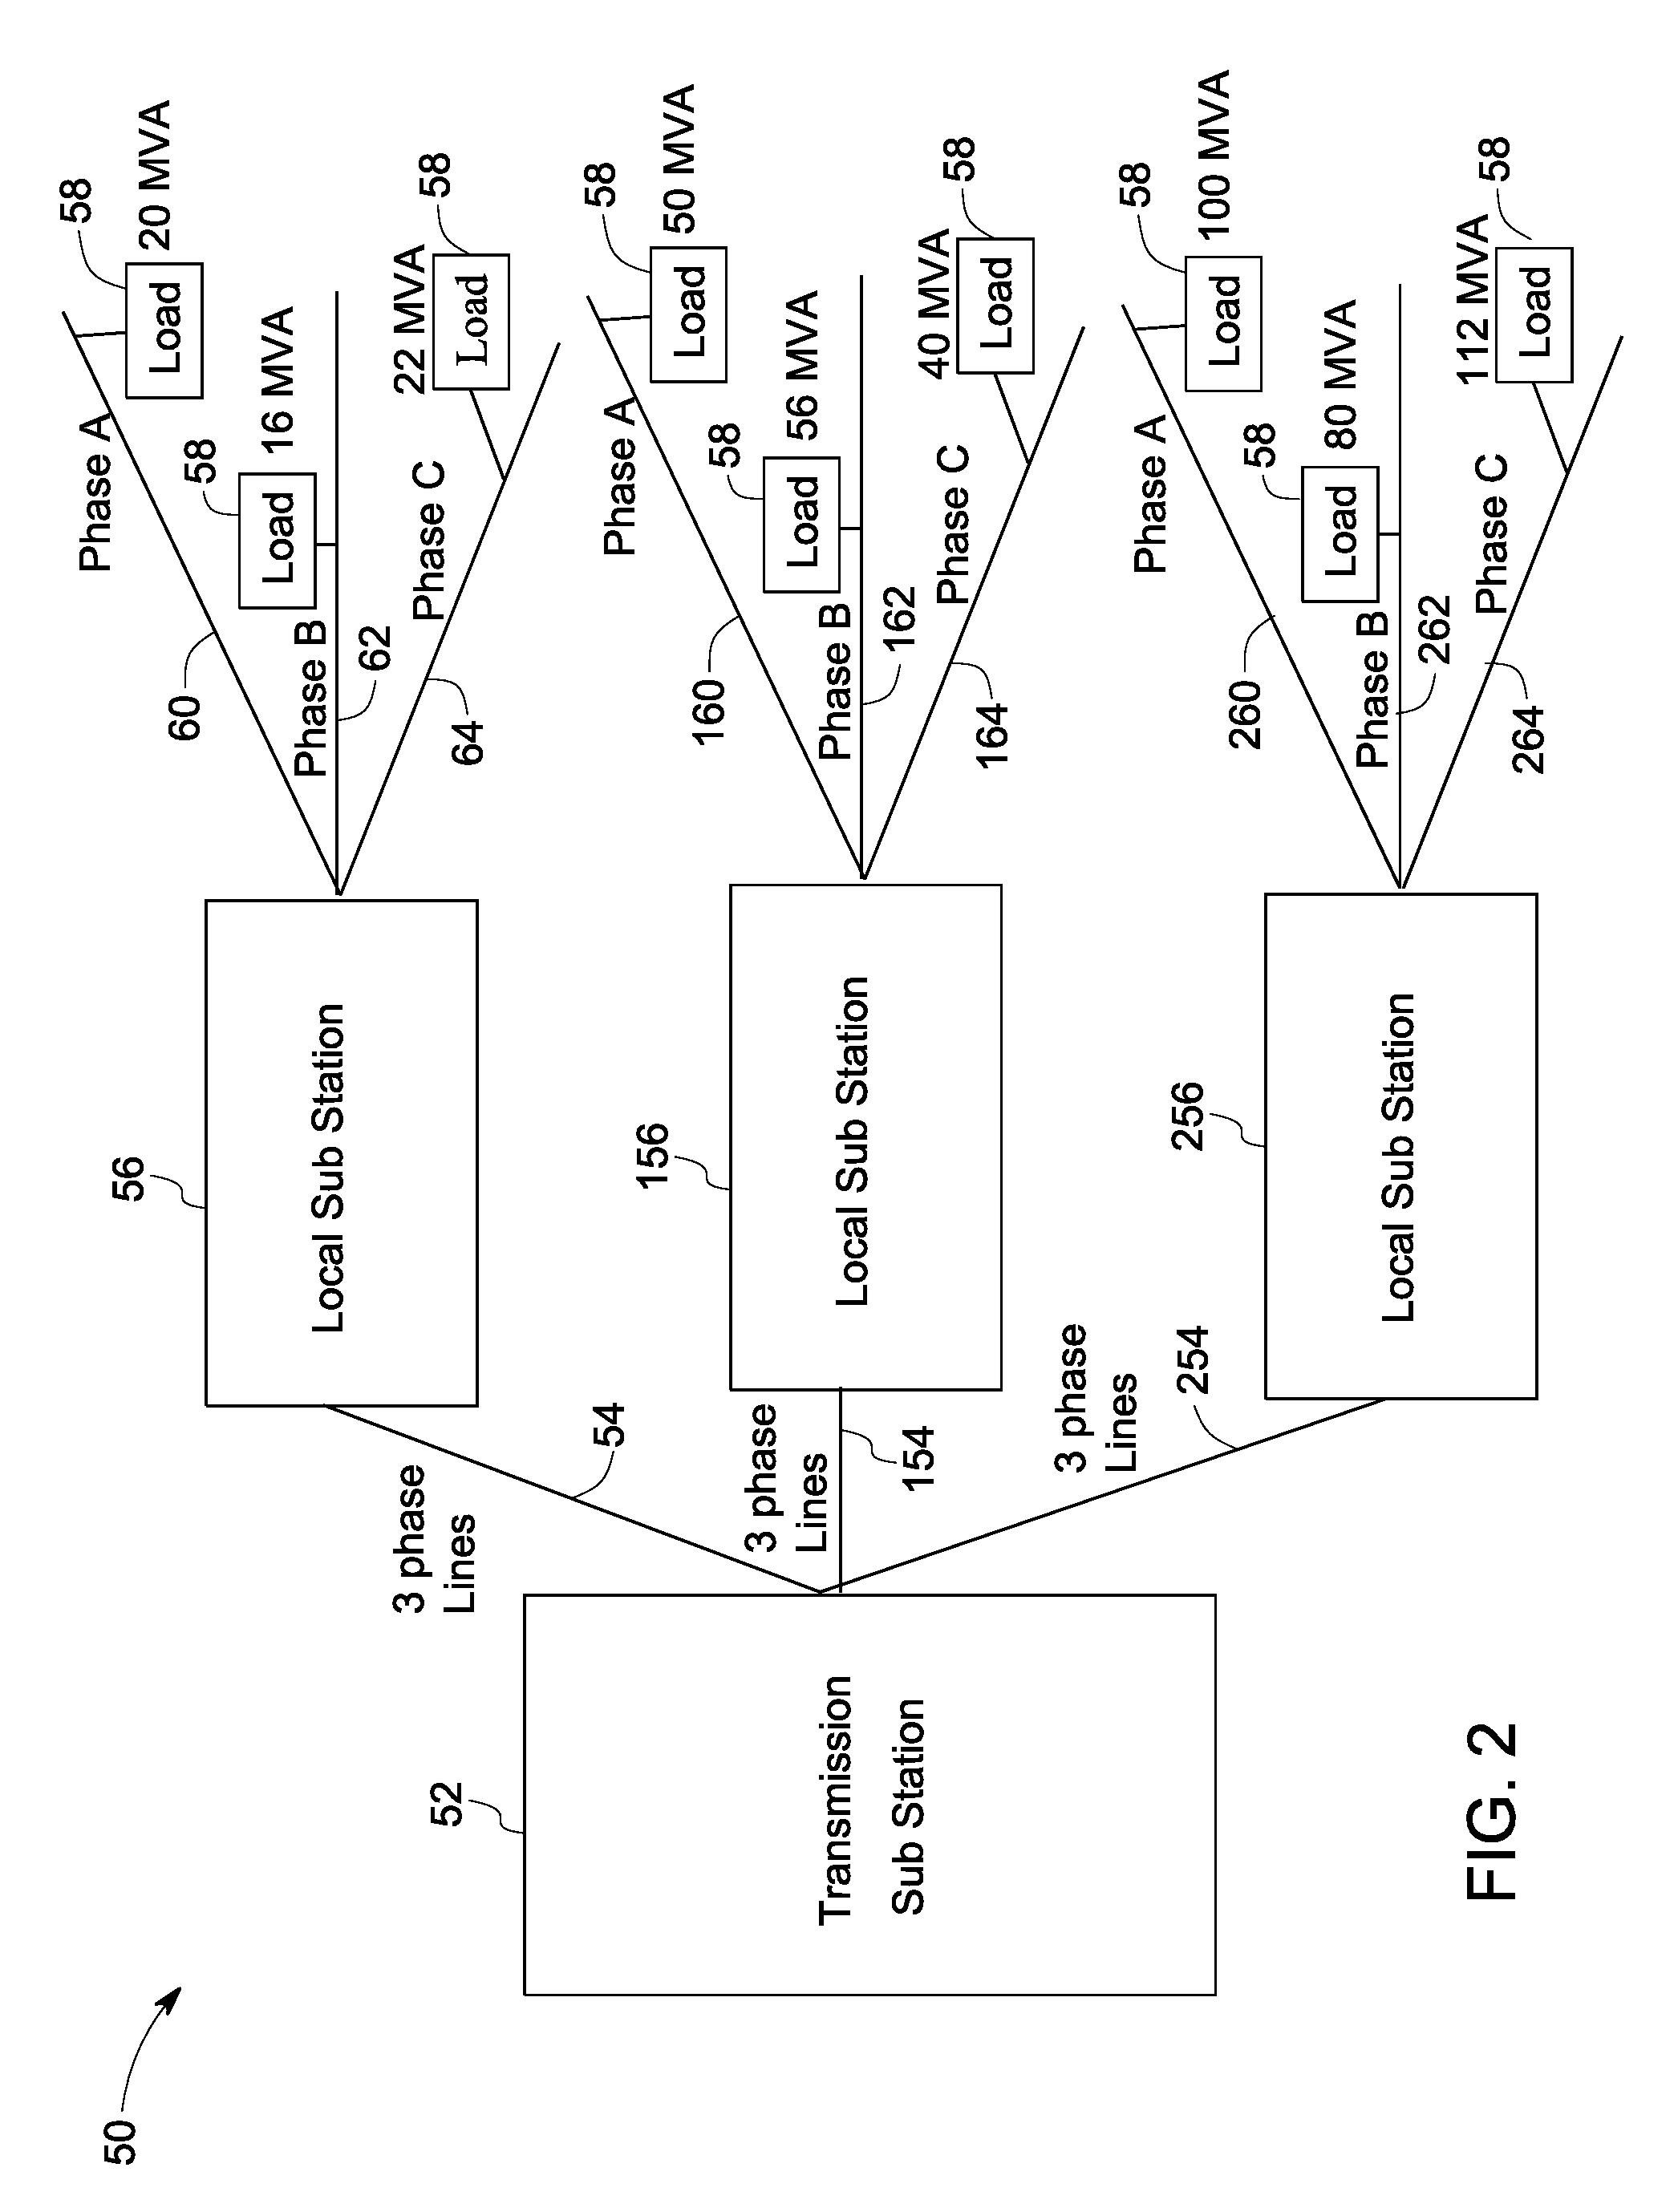 System and method for phase balancing in a power distribution system